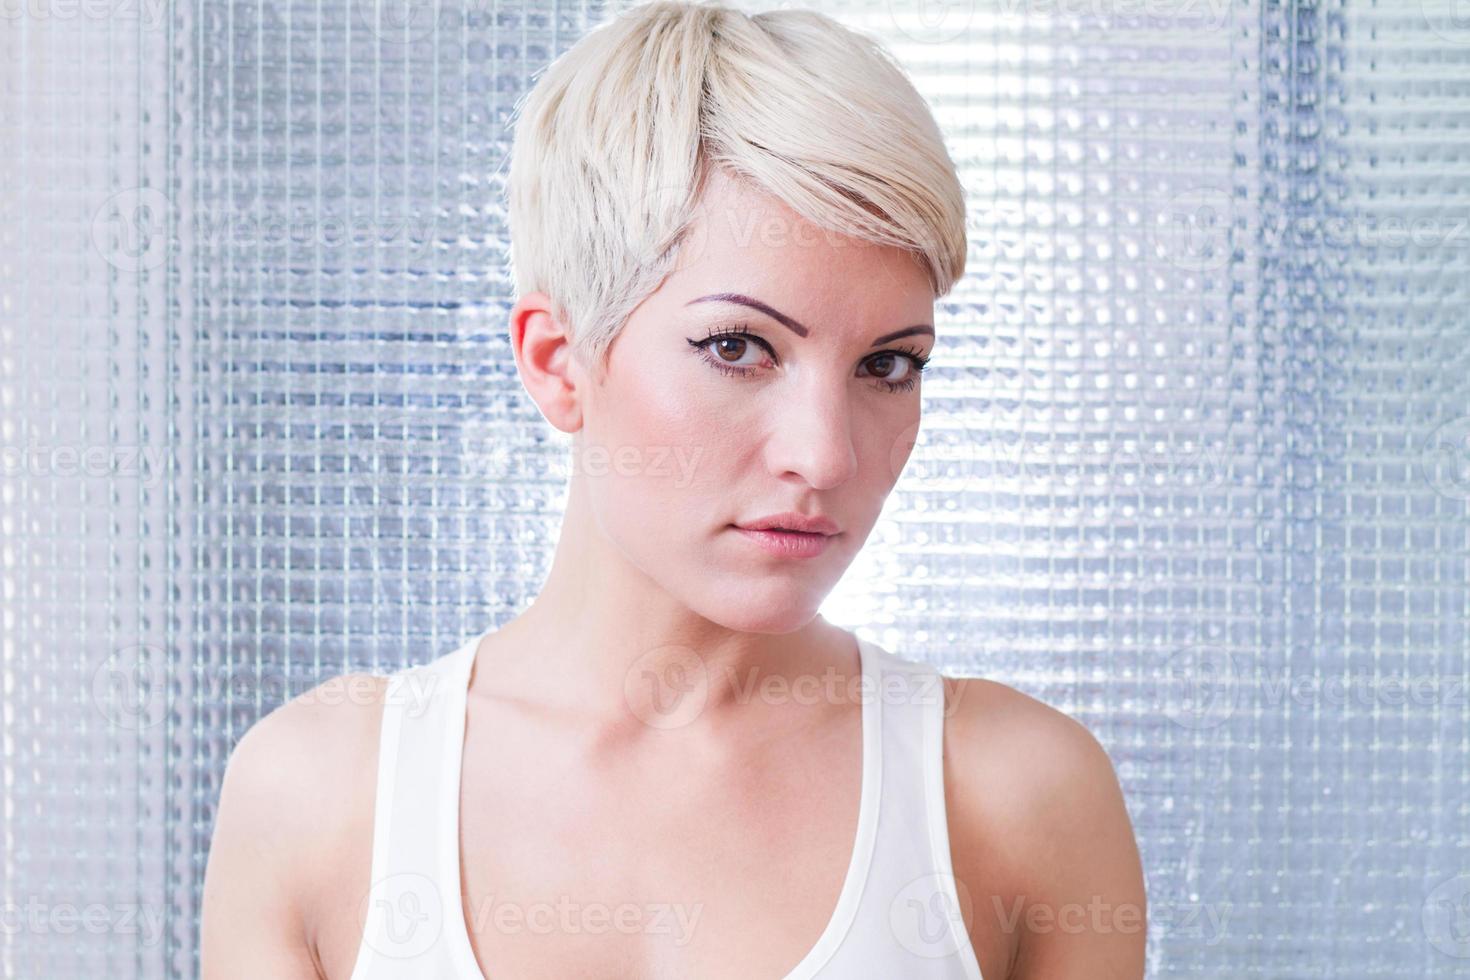 2. How to style short blonde hair for yoga - wide 2